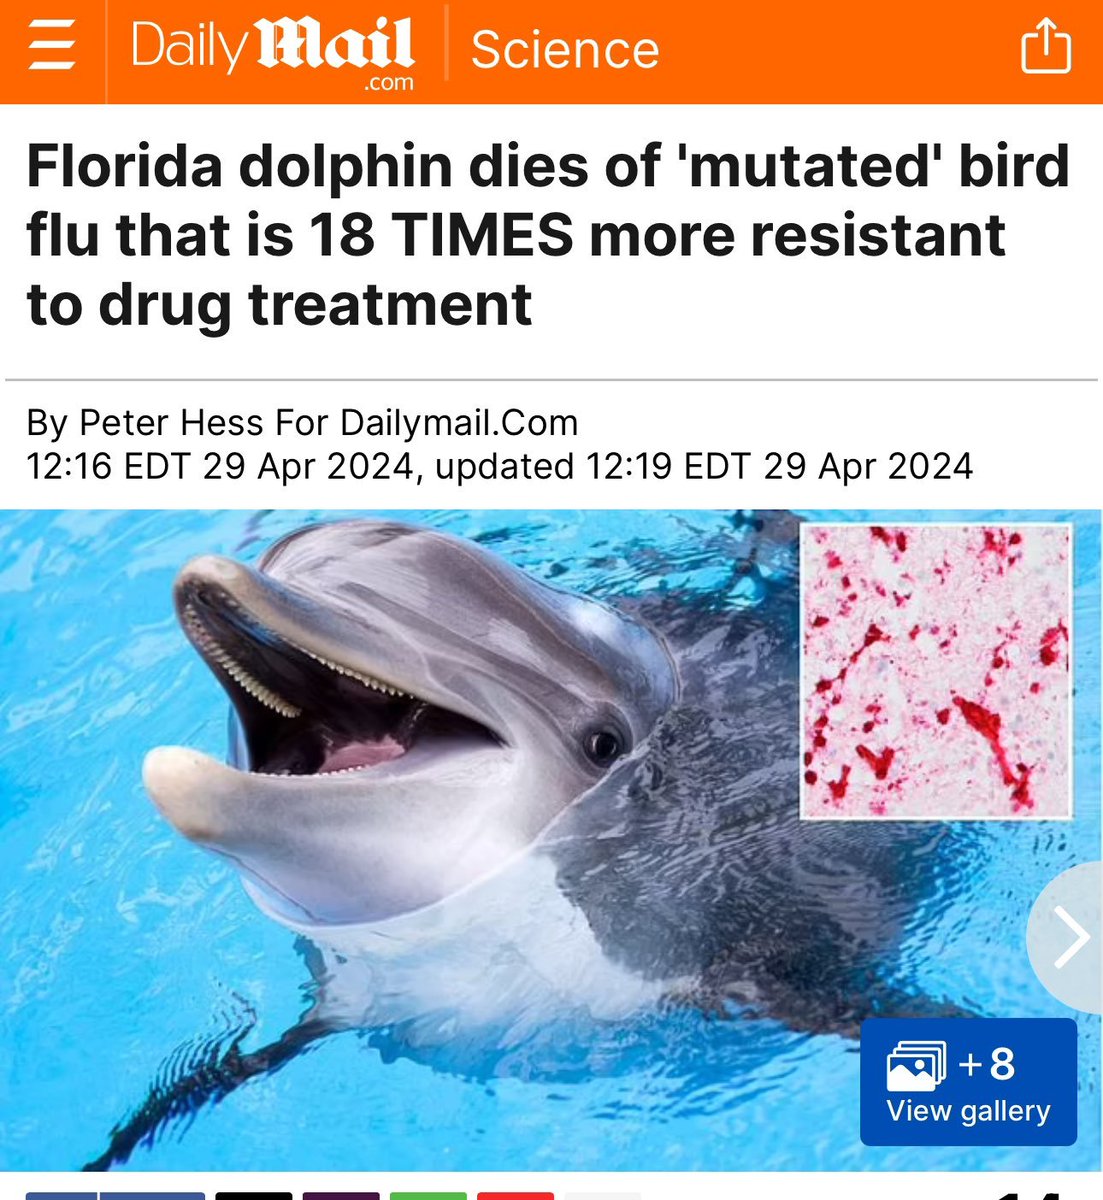 You can't make this stuff up

Now they're claiming a dolphin died from a mutated bird flu